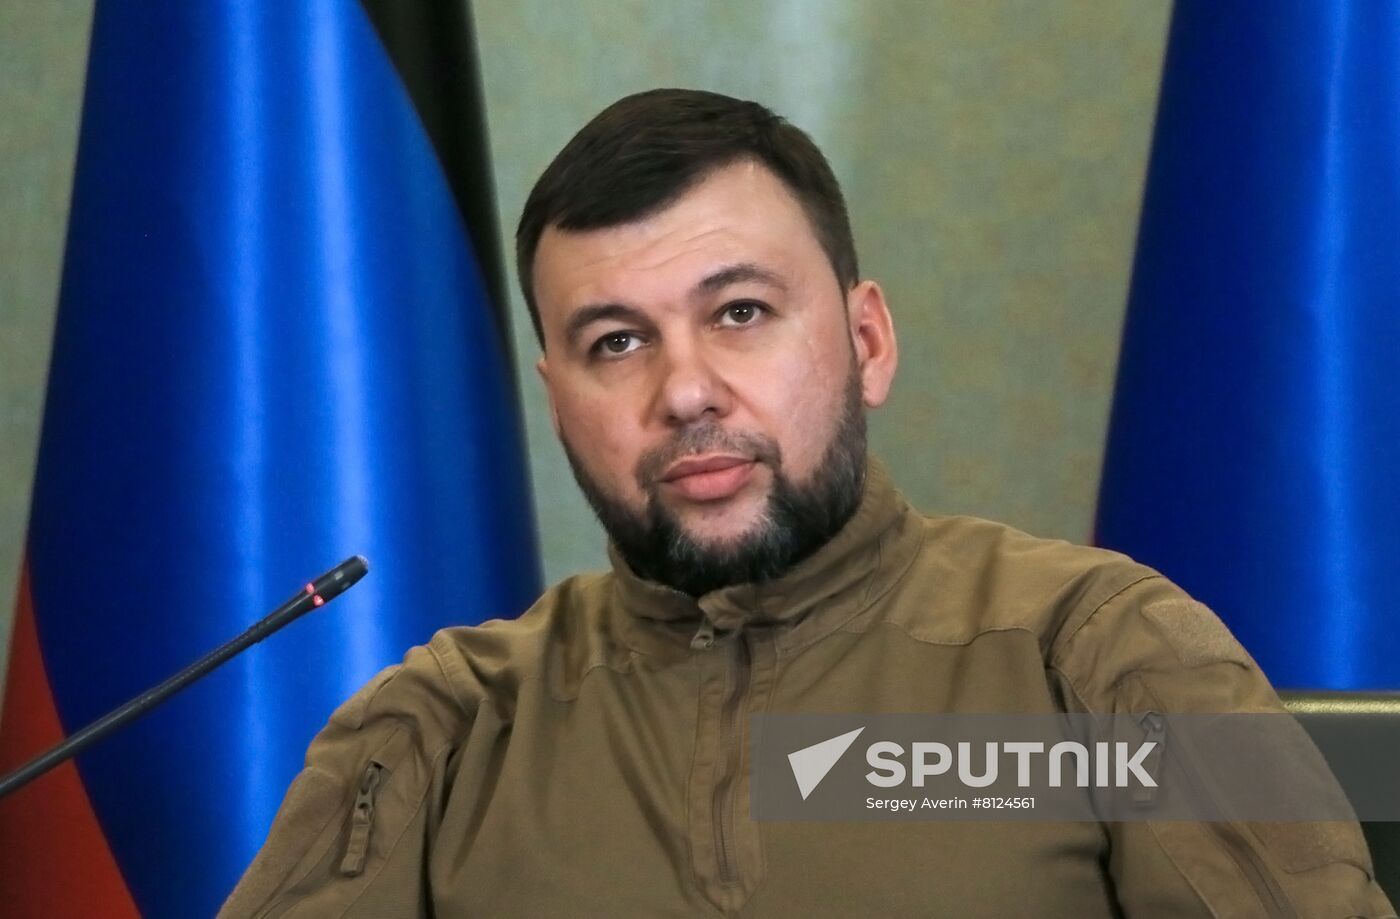 DPR Head News Conference